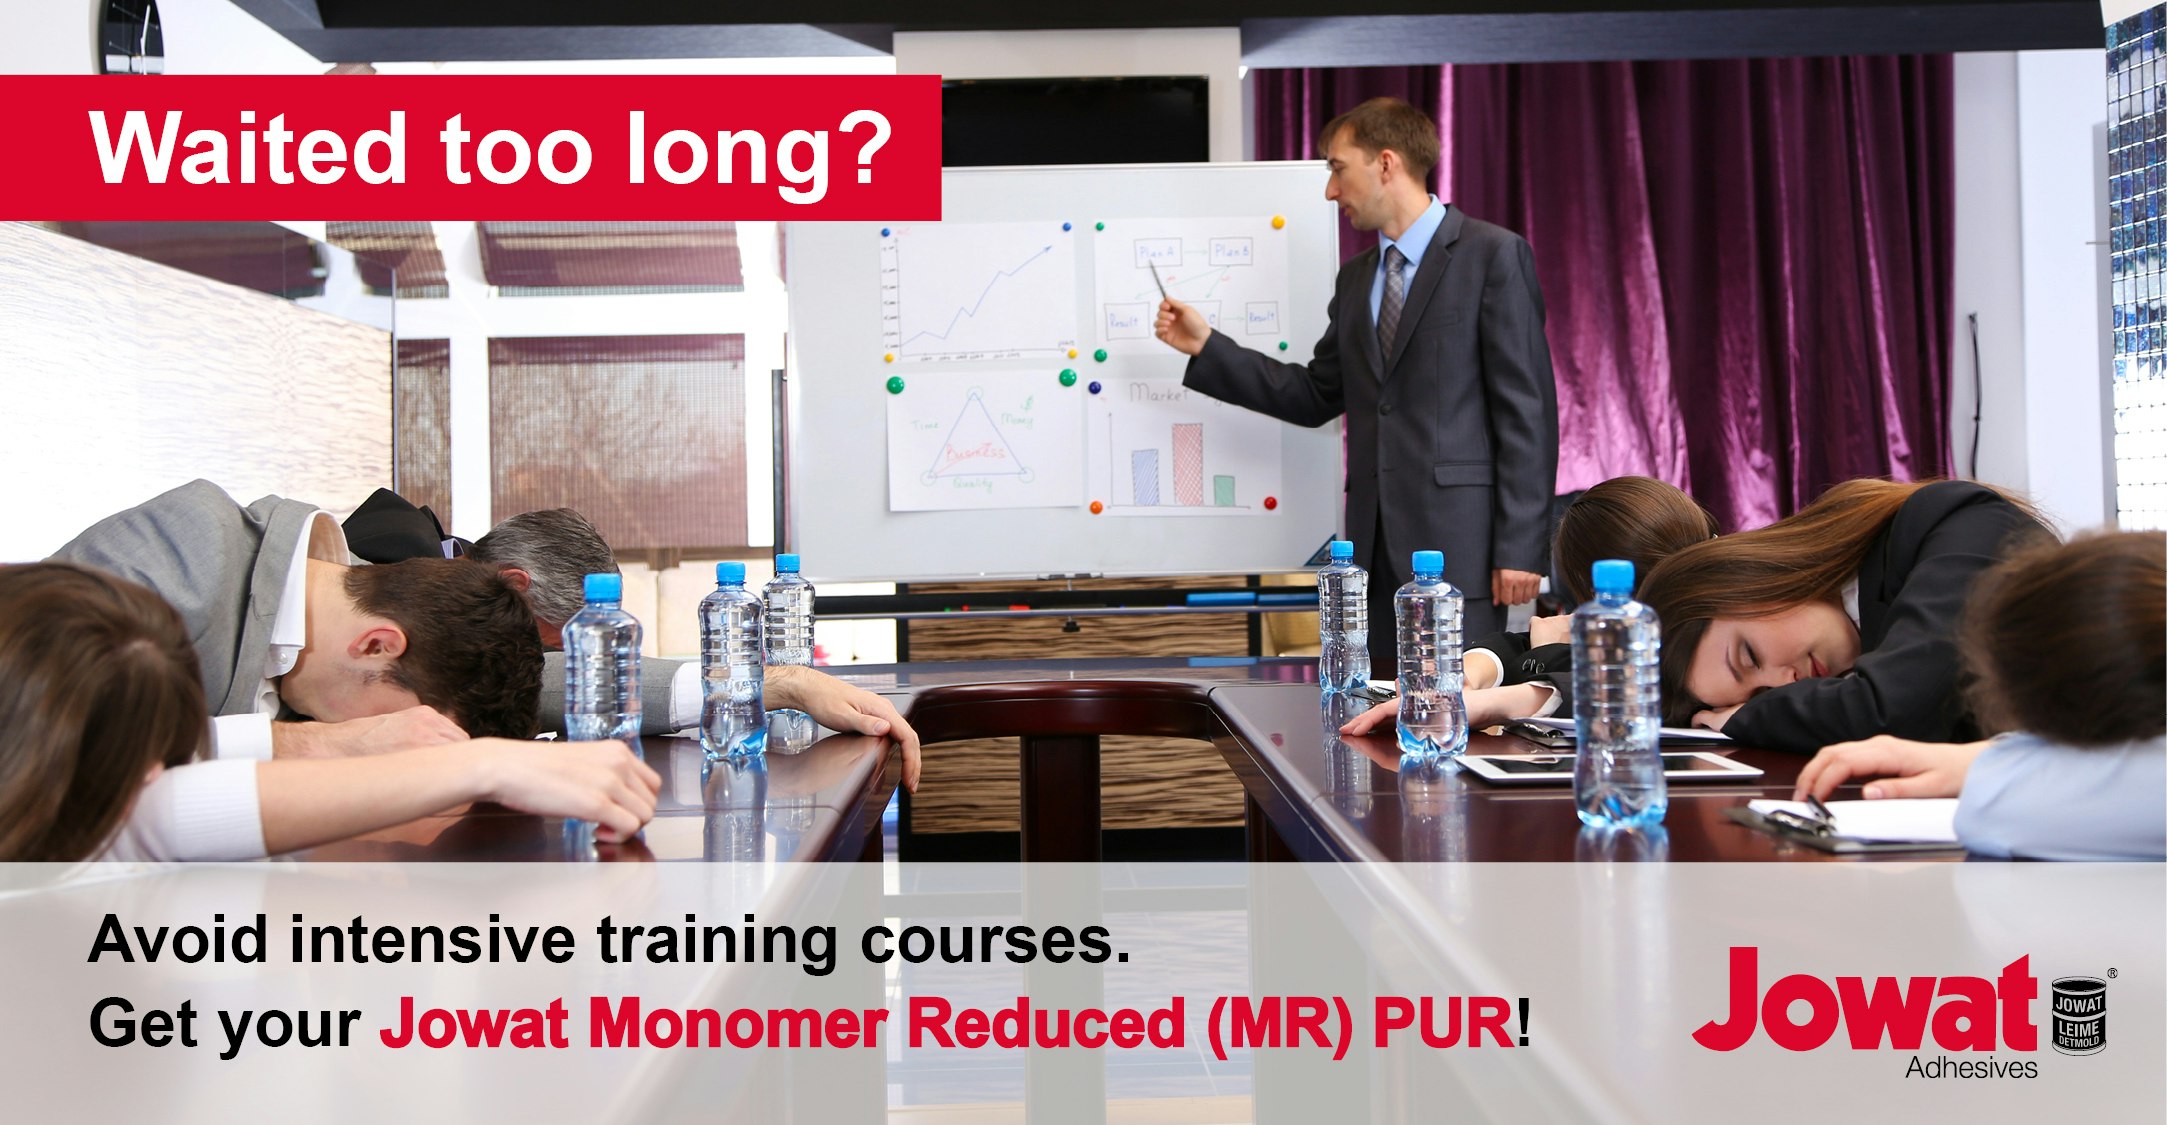 Avoid intensive training courses - get your Jowat Monomer Reduced MR PUR